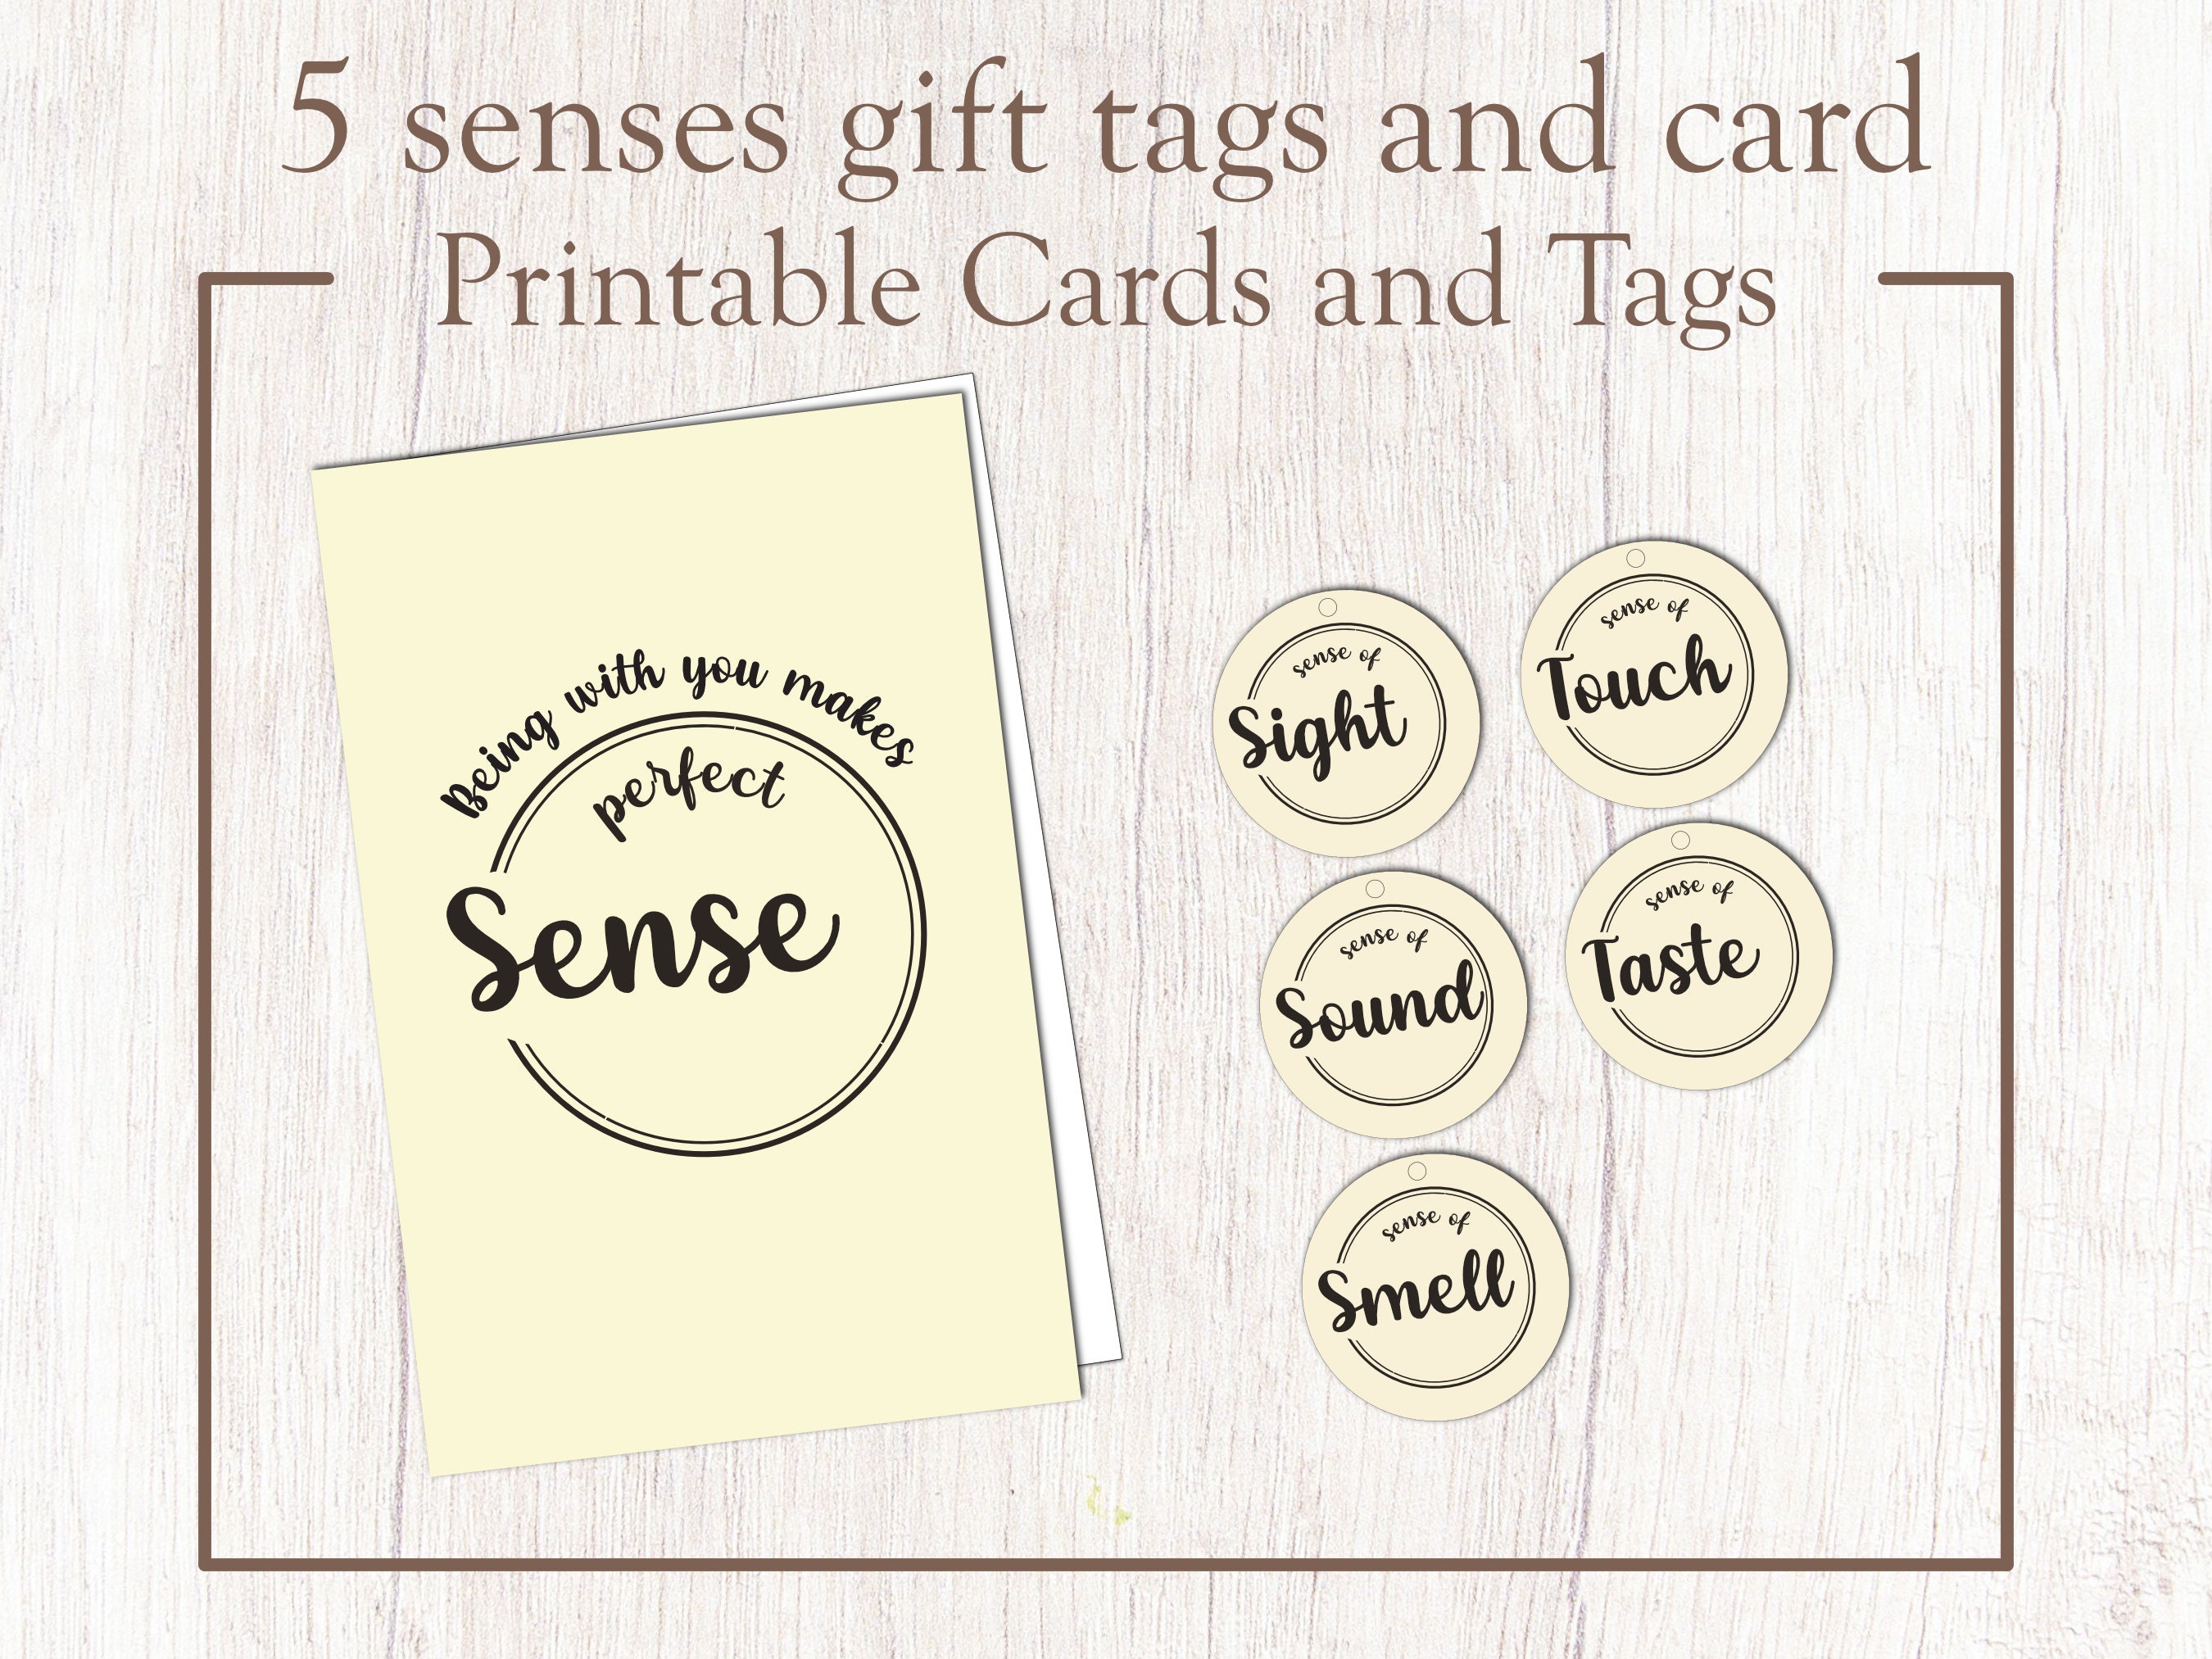 5 Senses Gift Tags, Cards & Ideas Gift for Boyfriend, Girlfriend, Husband  or Wife Valentine's Gift Birthday Gift Anniversary Gift 